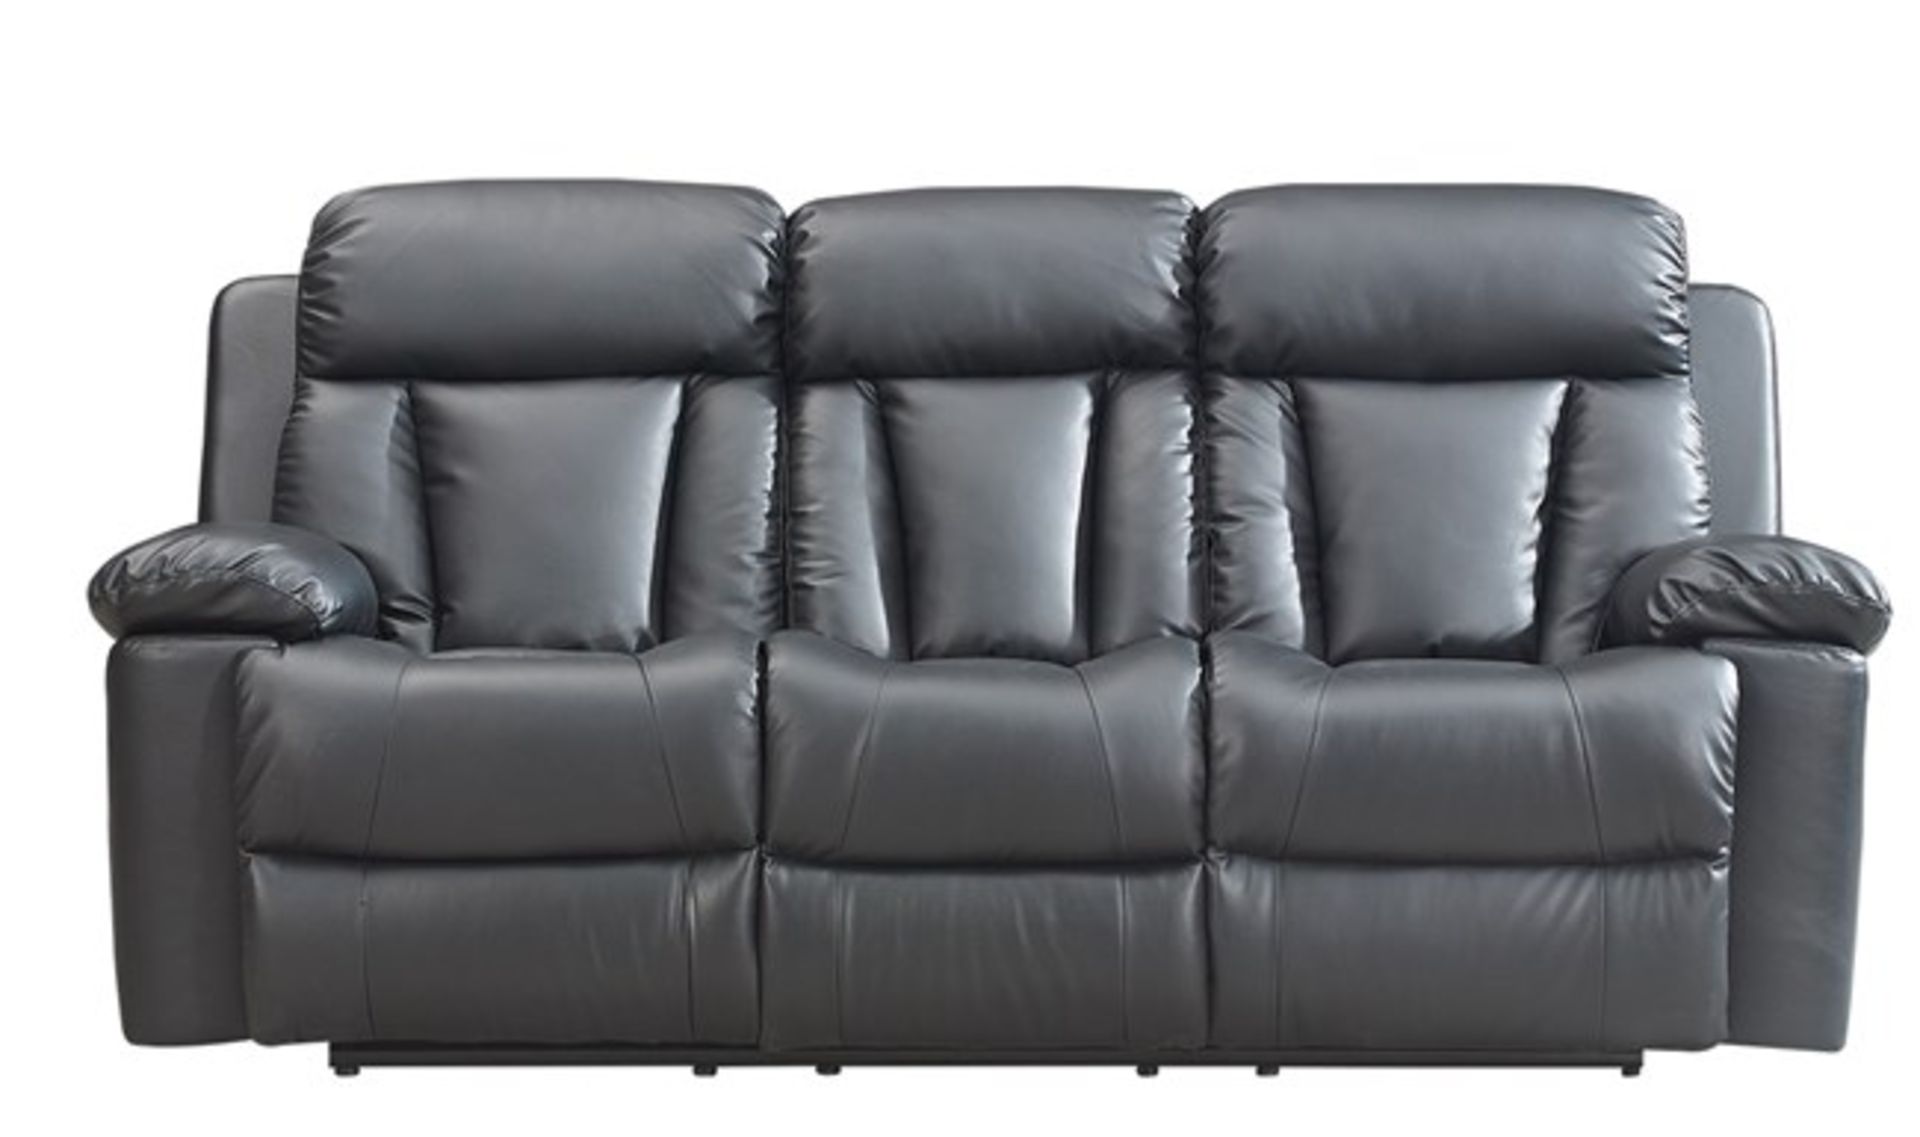 Brand new boxed direct from the manufacturers Boston 3 seater plus 2 seater elephant grey leather